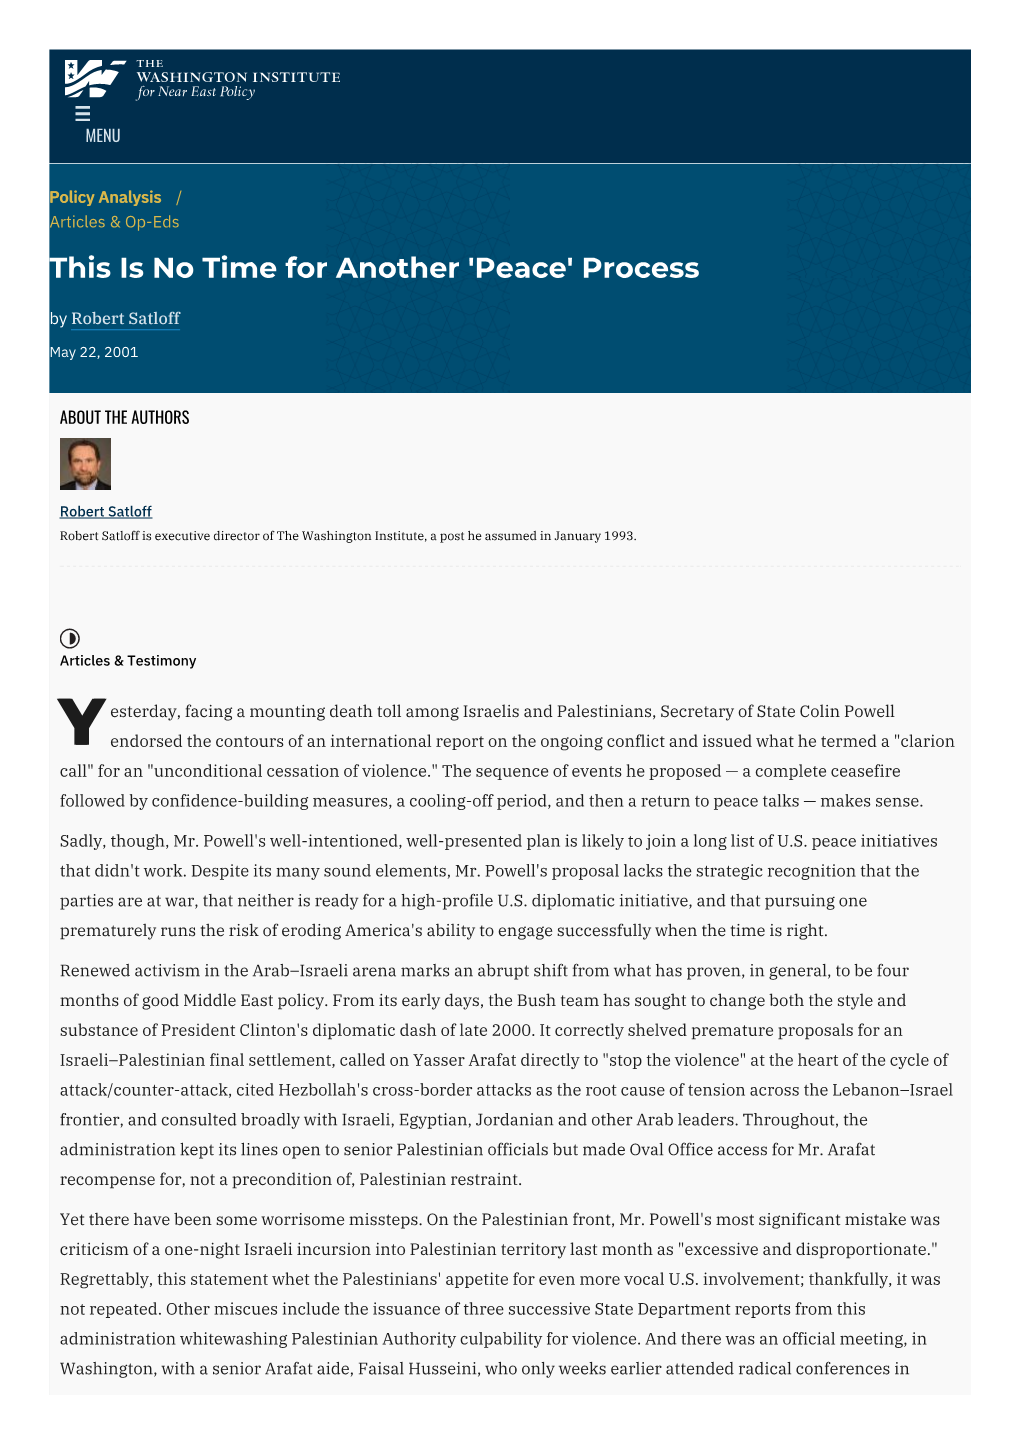 This Is No Time for Another 'Peace' Process | the Washington Institute